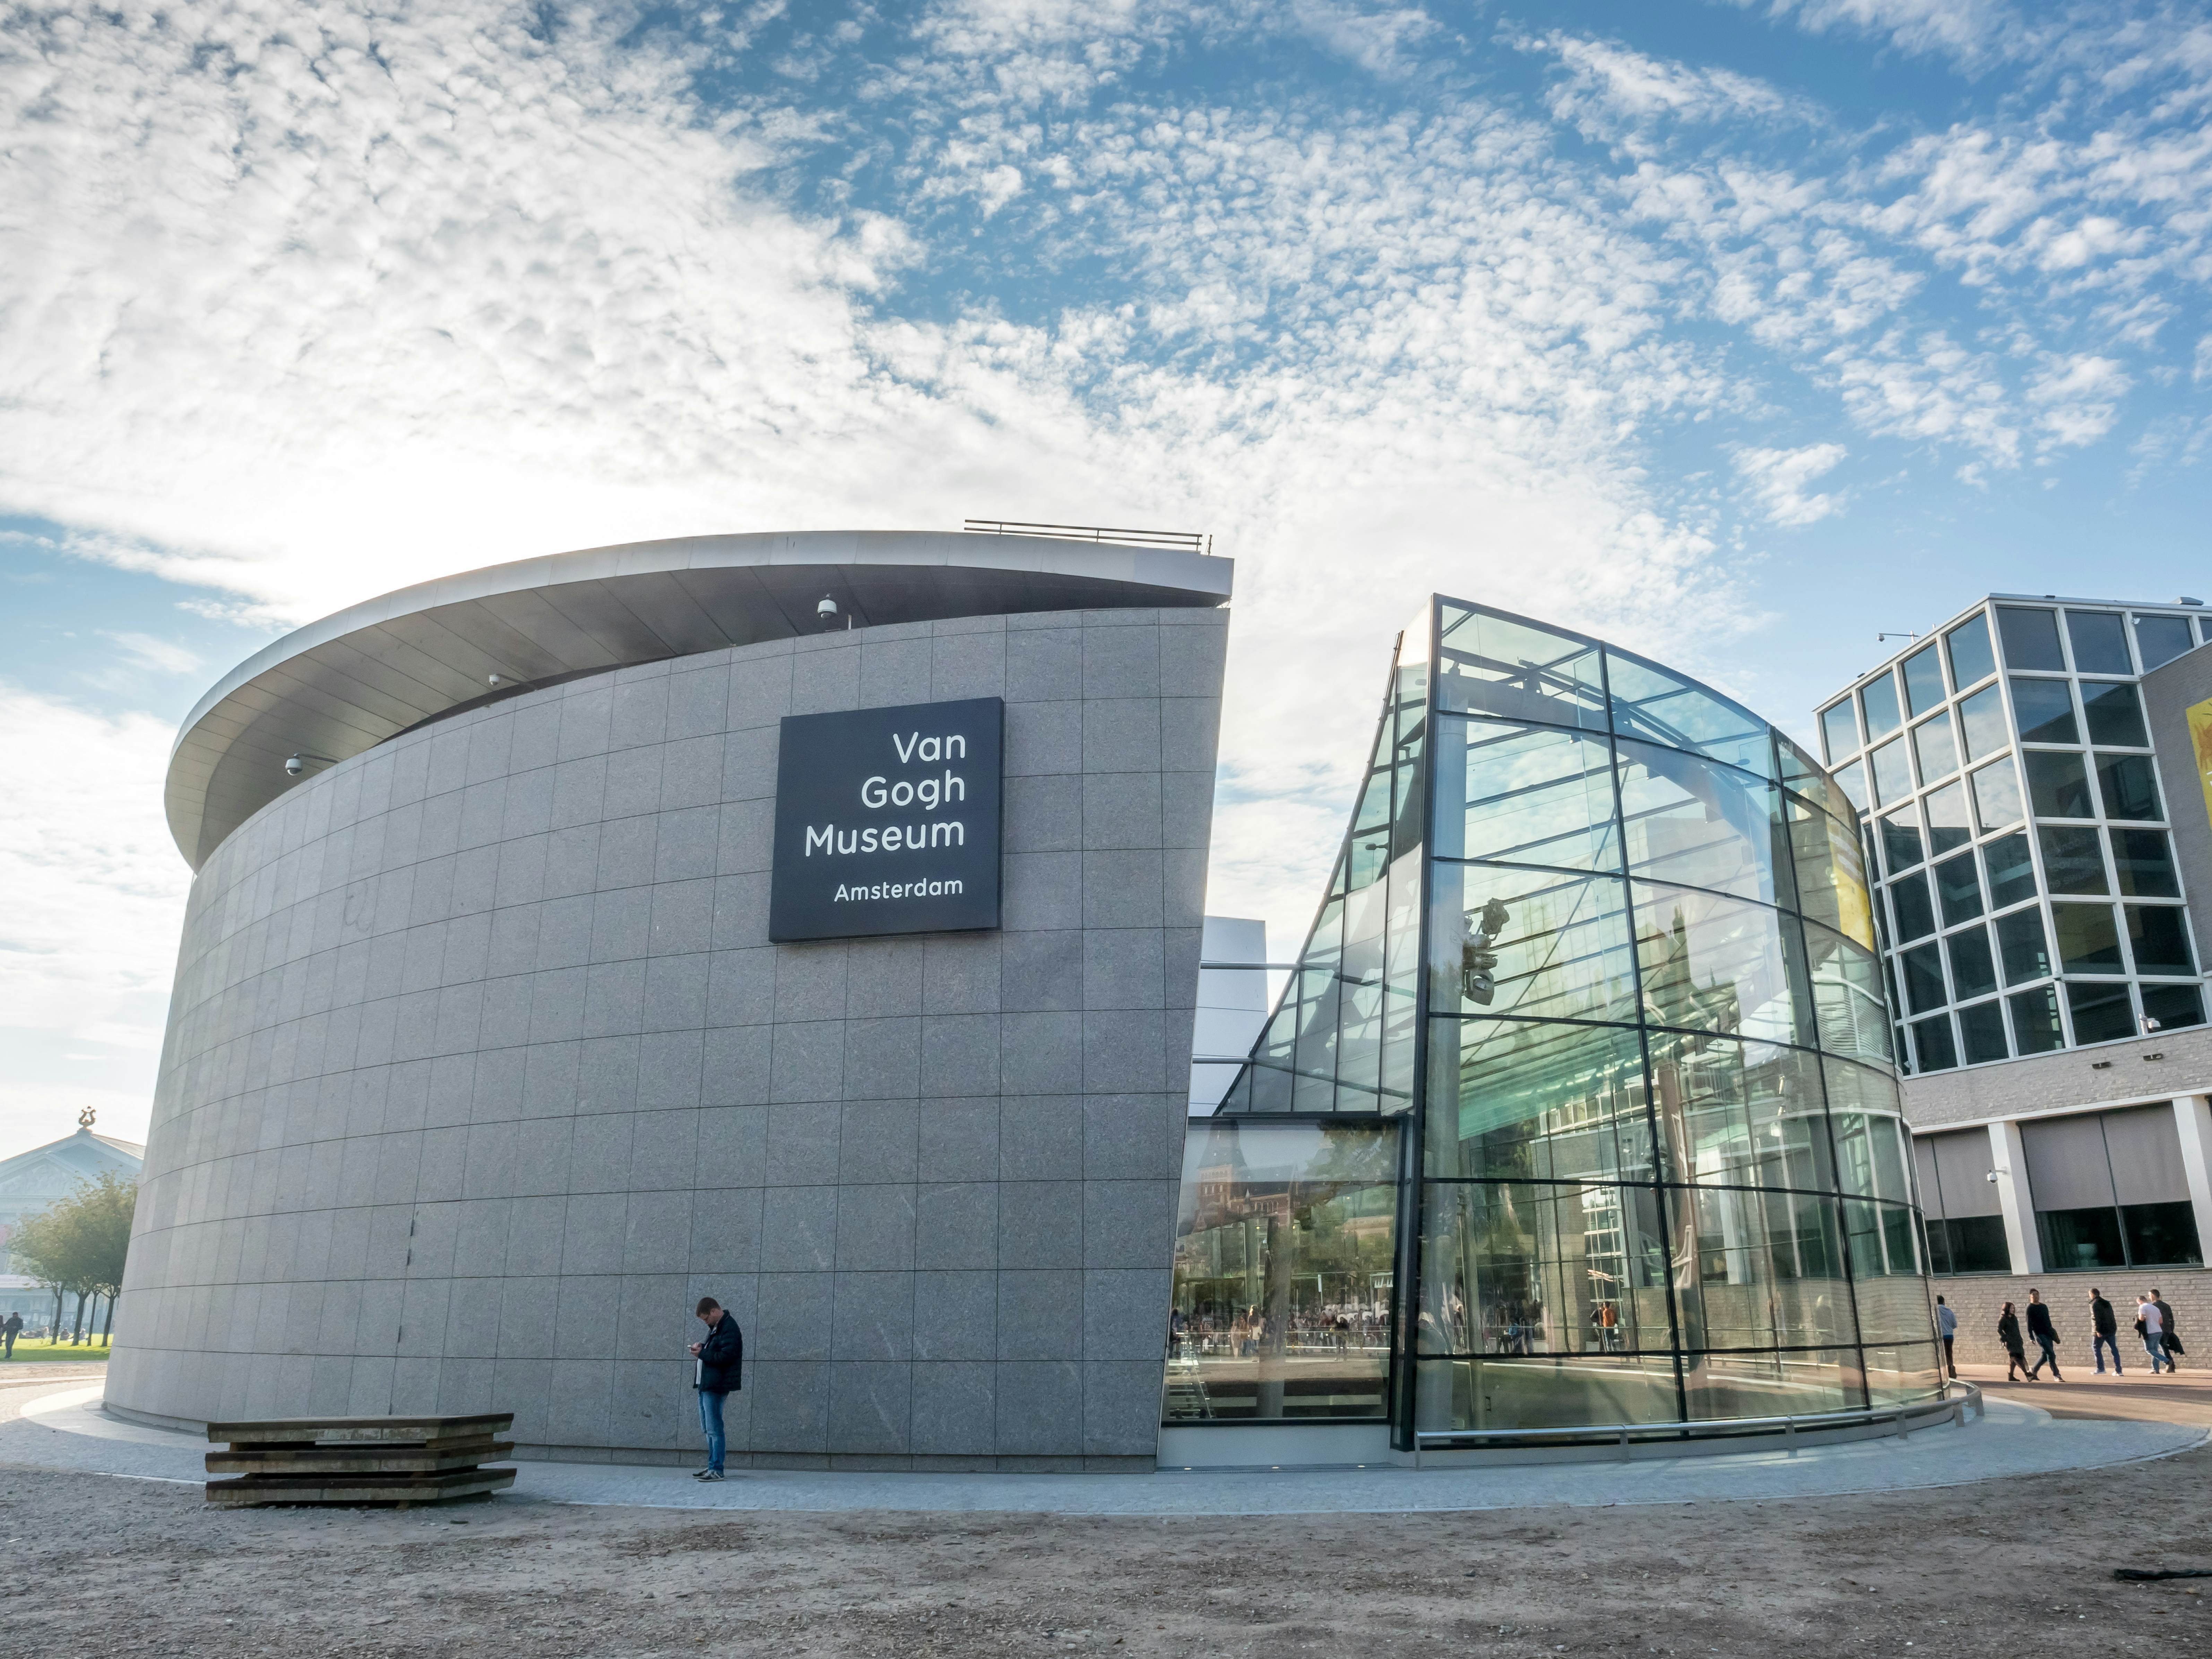 van-gogh-museum-amsterdam-the-netherlands-sights-lonely-planet